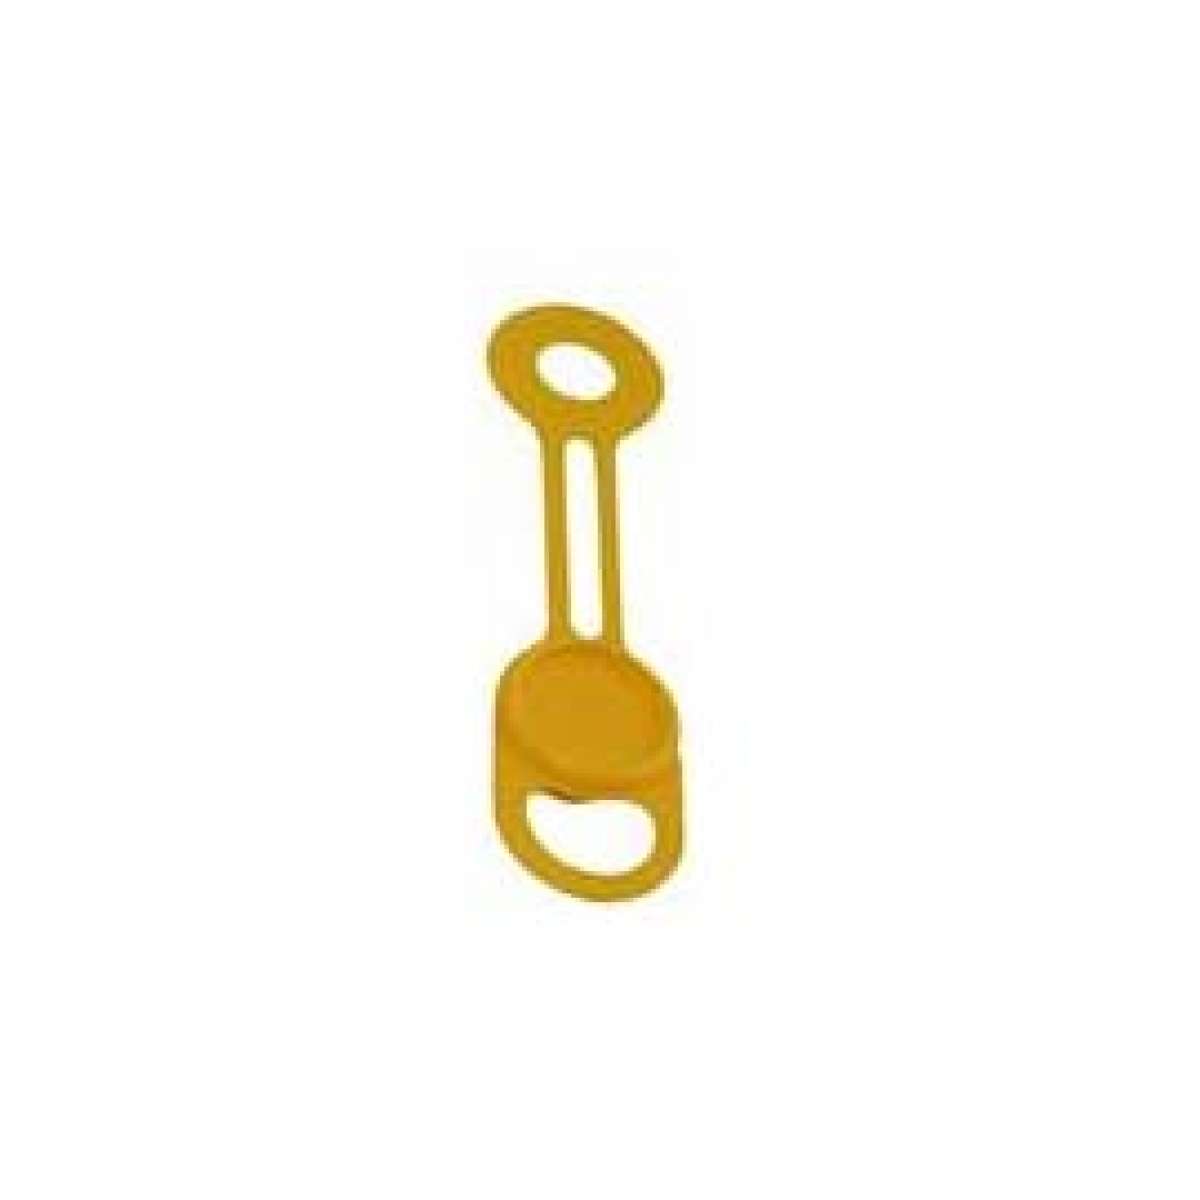 1/4" Grease Fitting Protector (Yellow) - Pack of 100